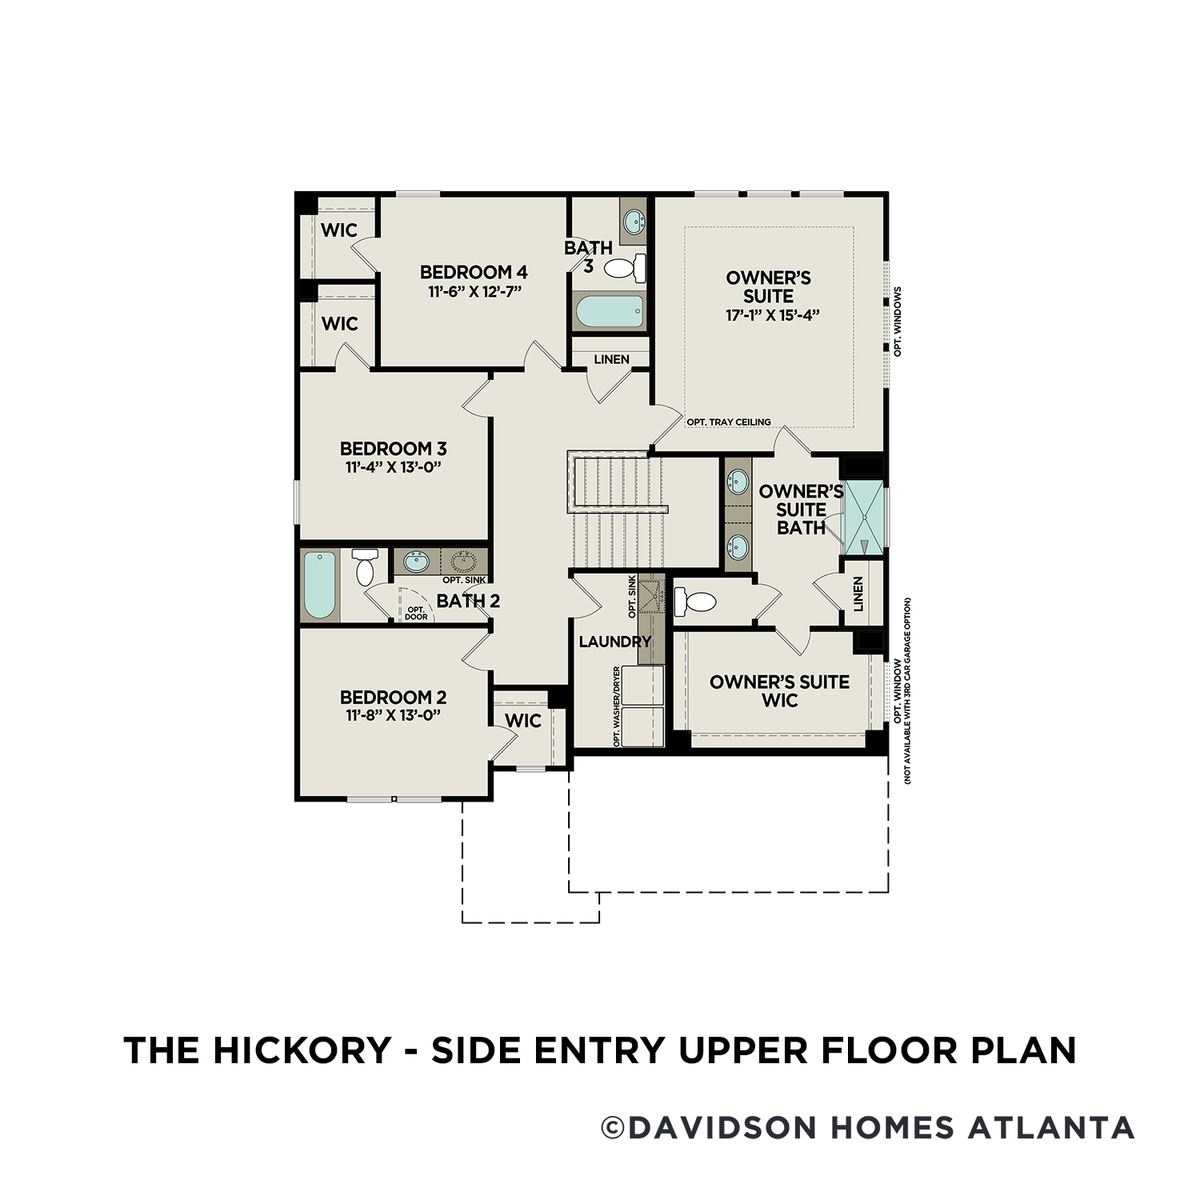 2 - The Hickory A – Side Entry floor plan layout for 14 Riverburch Run in Davidson Homes' Riverwood community.